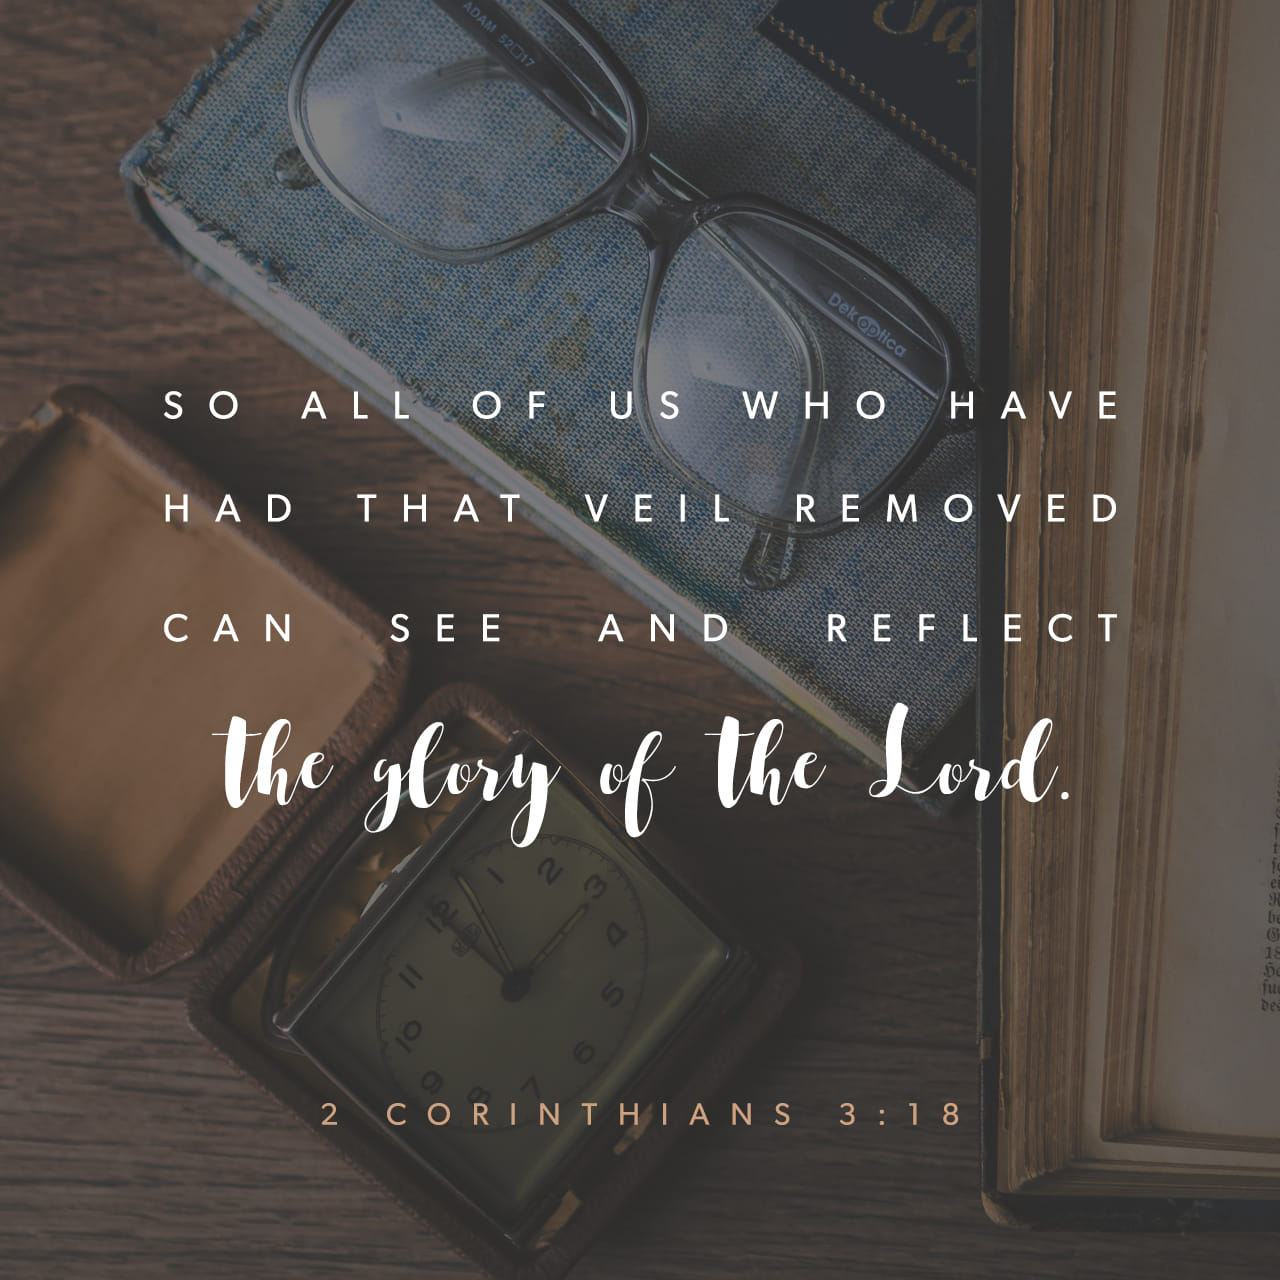 2 Corinthians 3:18 And we all, who with unveiled faces contemplate the  Lord's glory, are being transformed into his image with ever-increasing  glory, which comes from the Lord, who is the Spirit. |